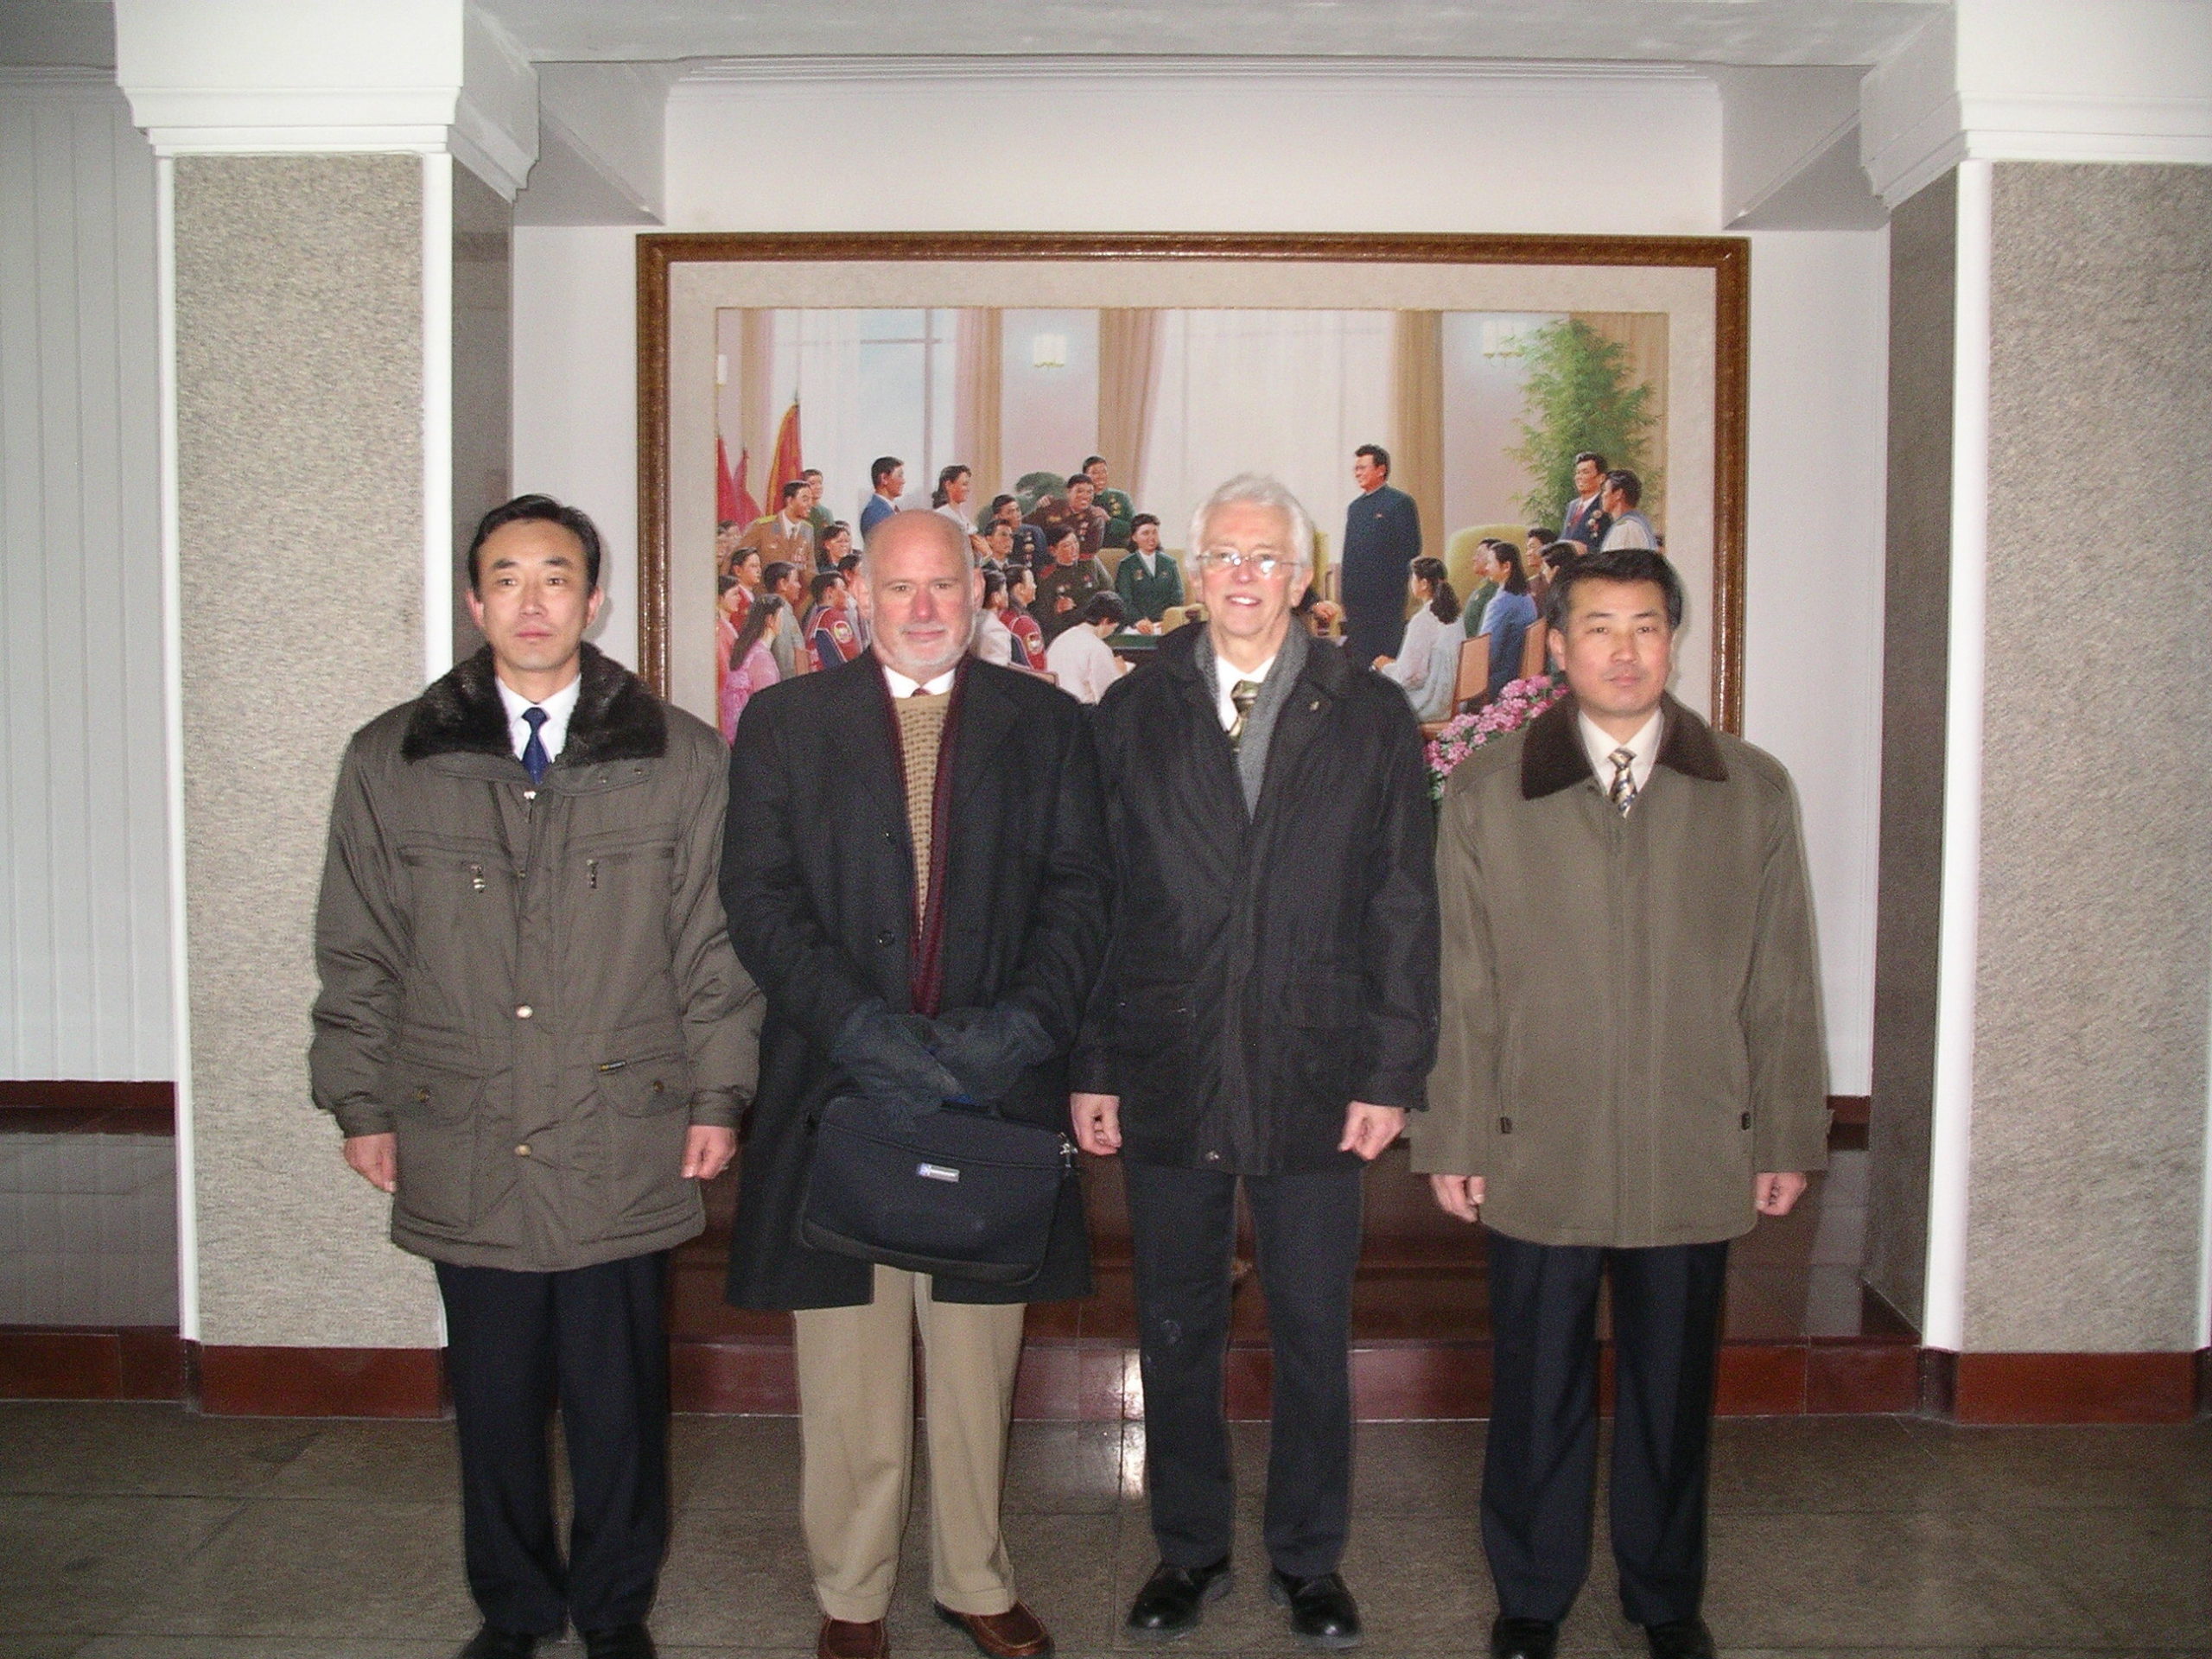 Two Americans flanked by two Koreans all wearing winter coats posing for photo in front of a painting of DPRK leaders